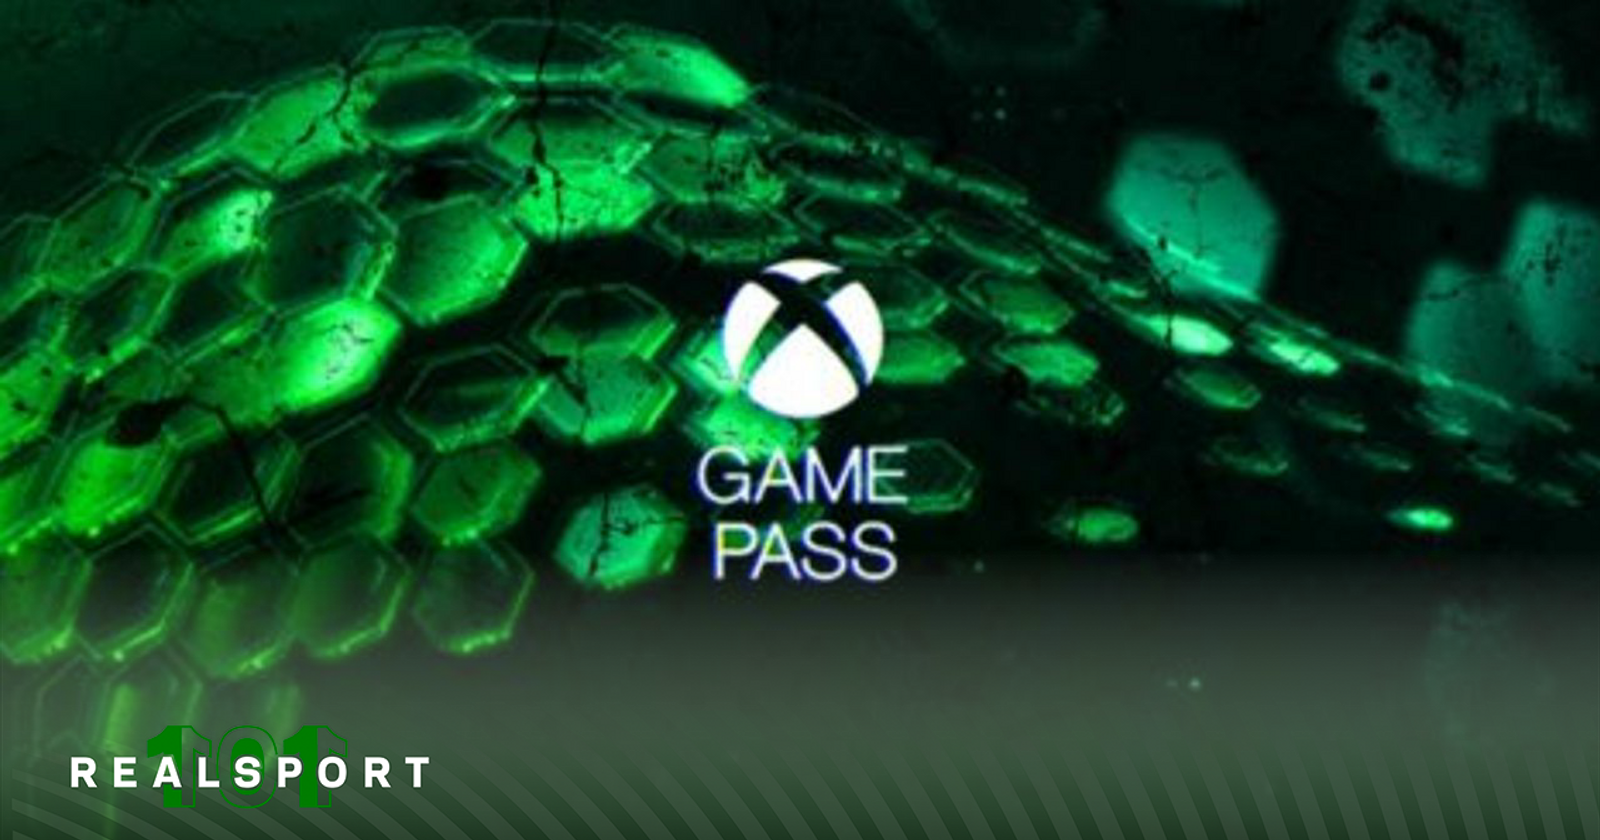 Xbox & PC Game Pass February 2023 games include Madden 23, Atomic